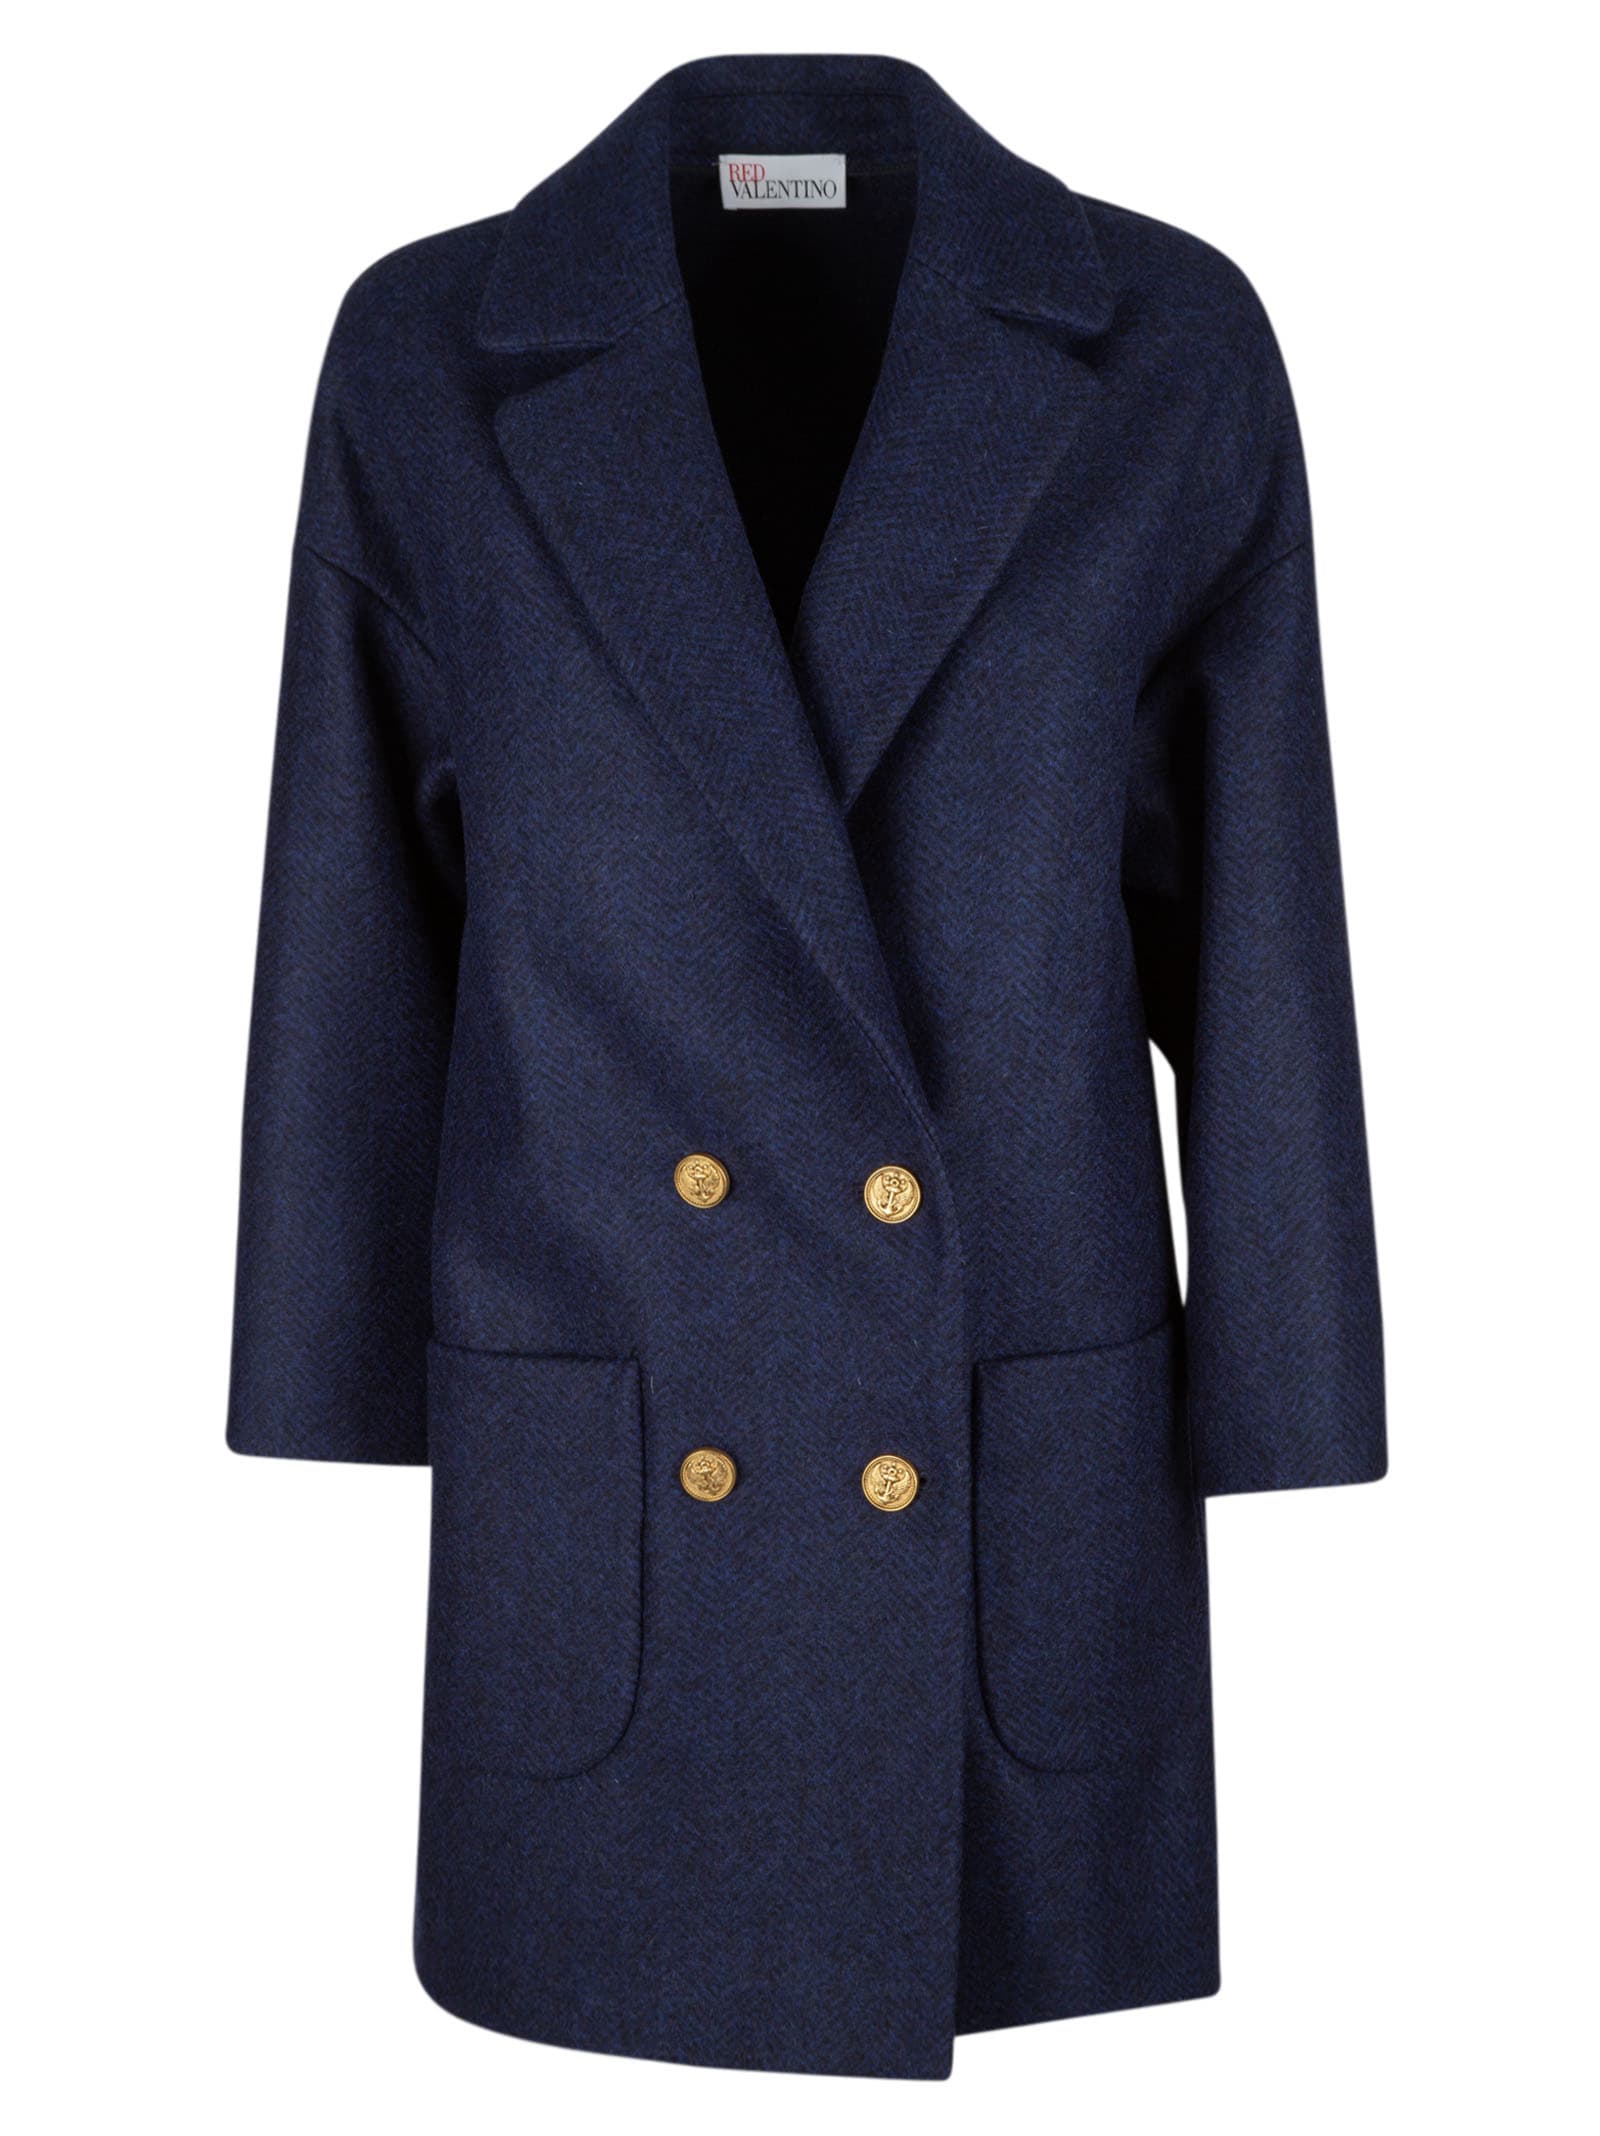 RED Valentino Plain Double-breasted Coat